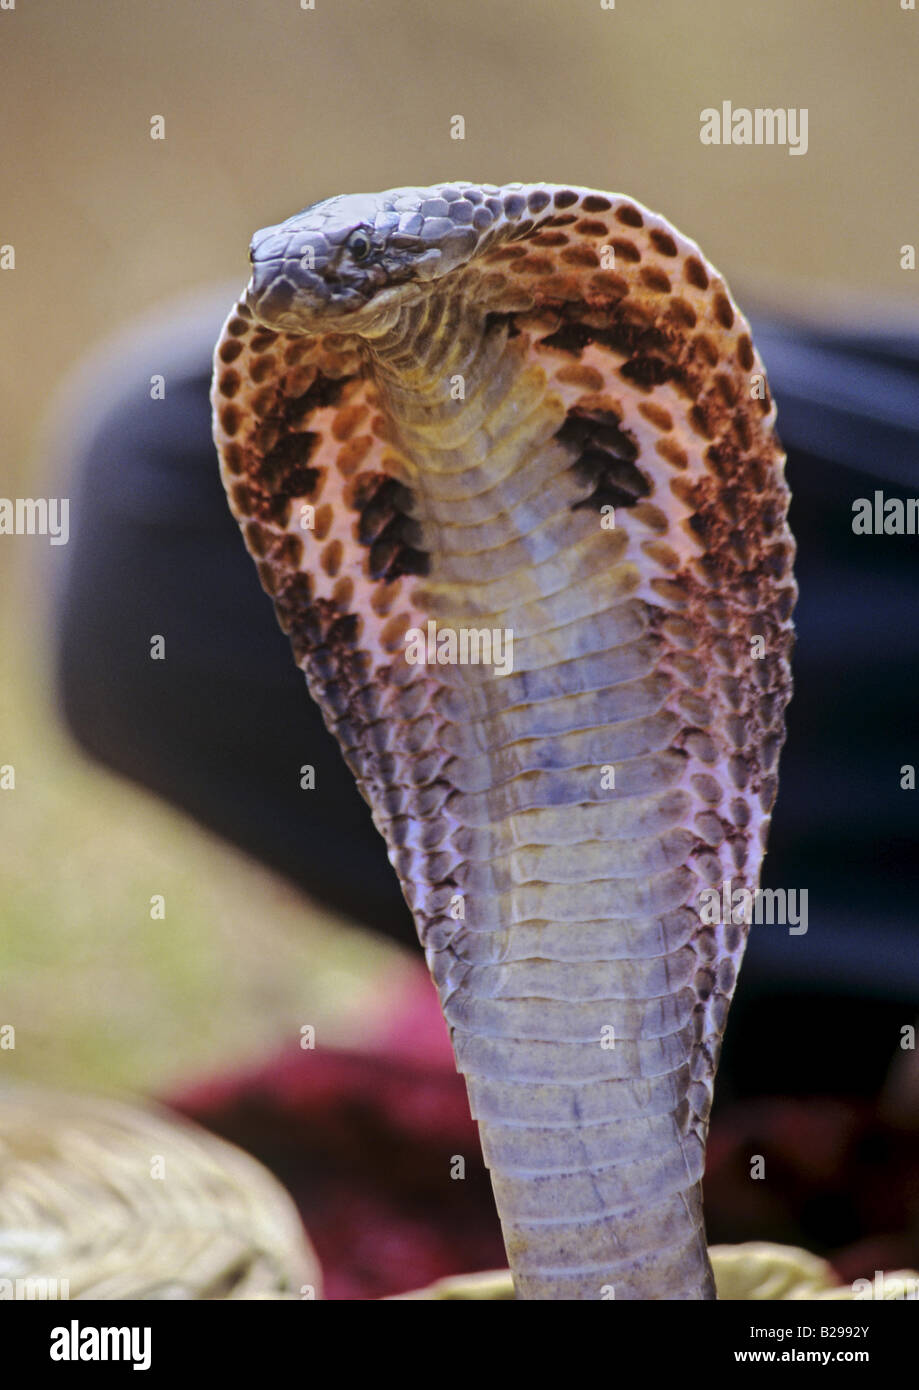 Hooded Cobra Goa State India Date 15 06 2008 Ref ZB548 115573 0095 COMPULSORY CREDIT World Pictures Photoshot Stock Photo